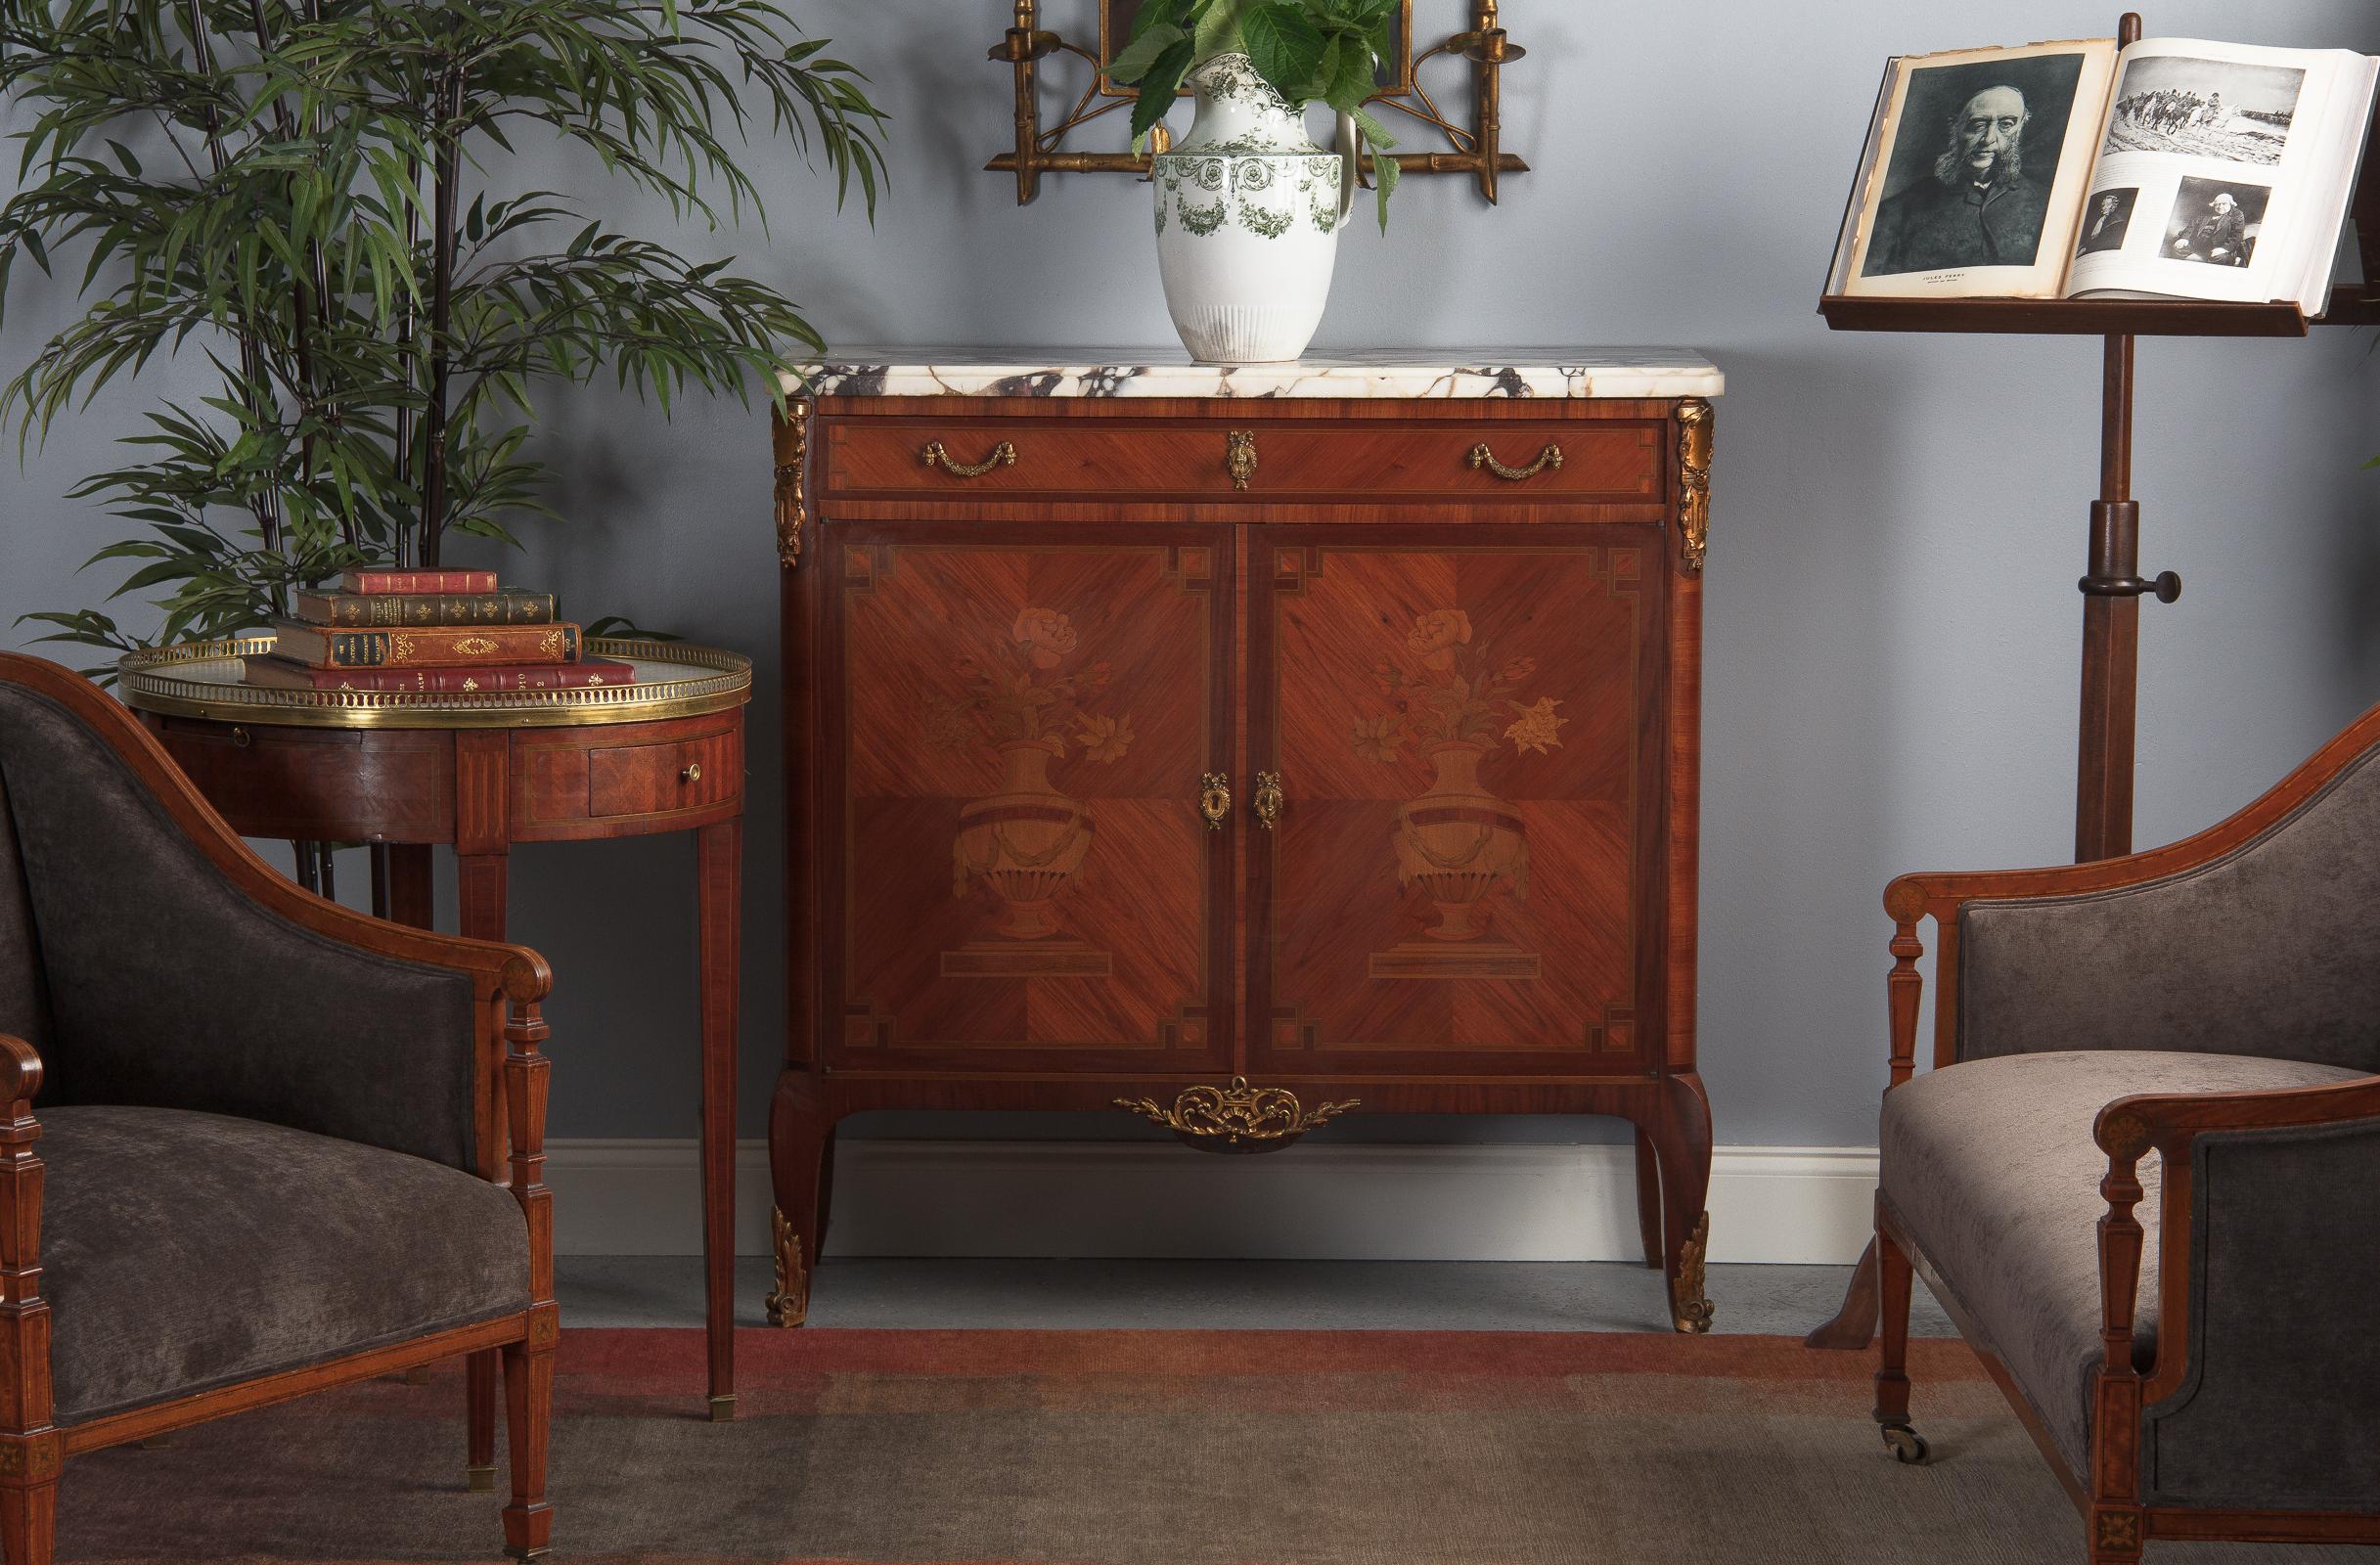 An ornate Louis XV and Louis XVI Transition style sideboard with elaborate marquetry and marble top, French, circa 1900. Cherrywood veneer along with other veneers of exotic and fruit woods, brass hardware and a thick Calcatta Viola marble top. Both